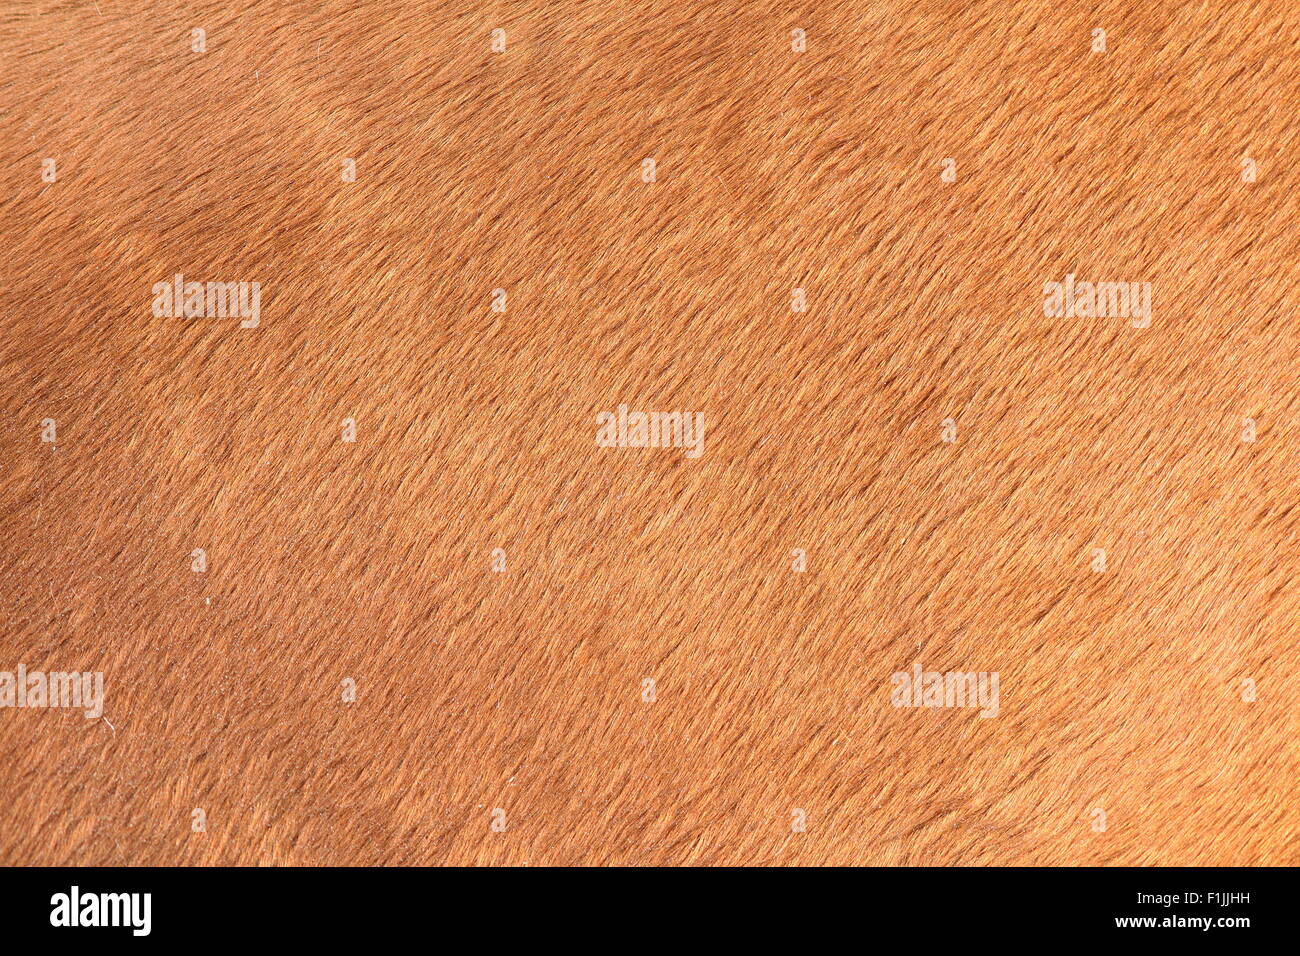 detail on the texture of brown horse hair Stock Photo